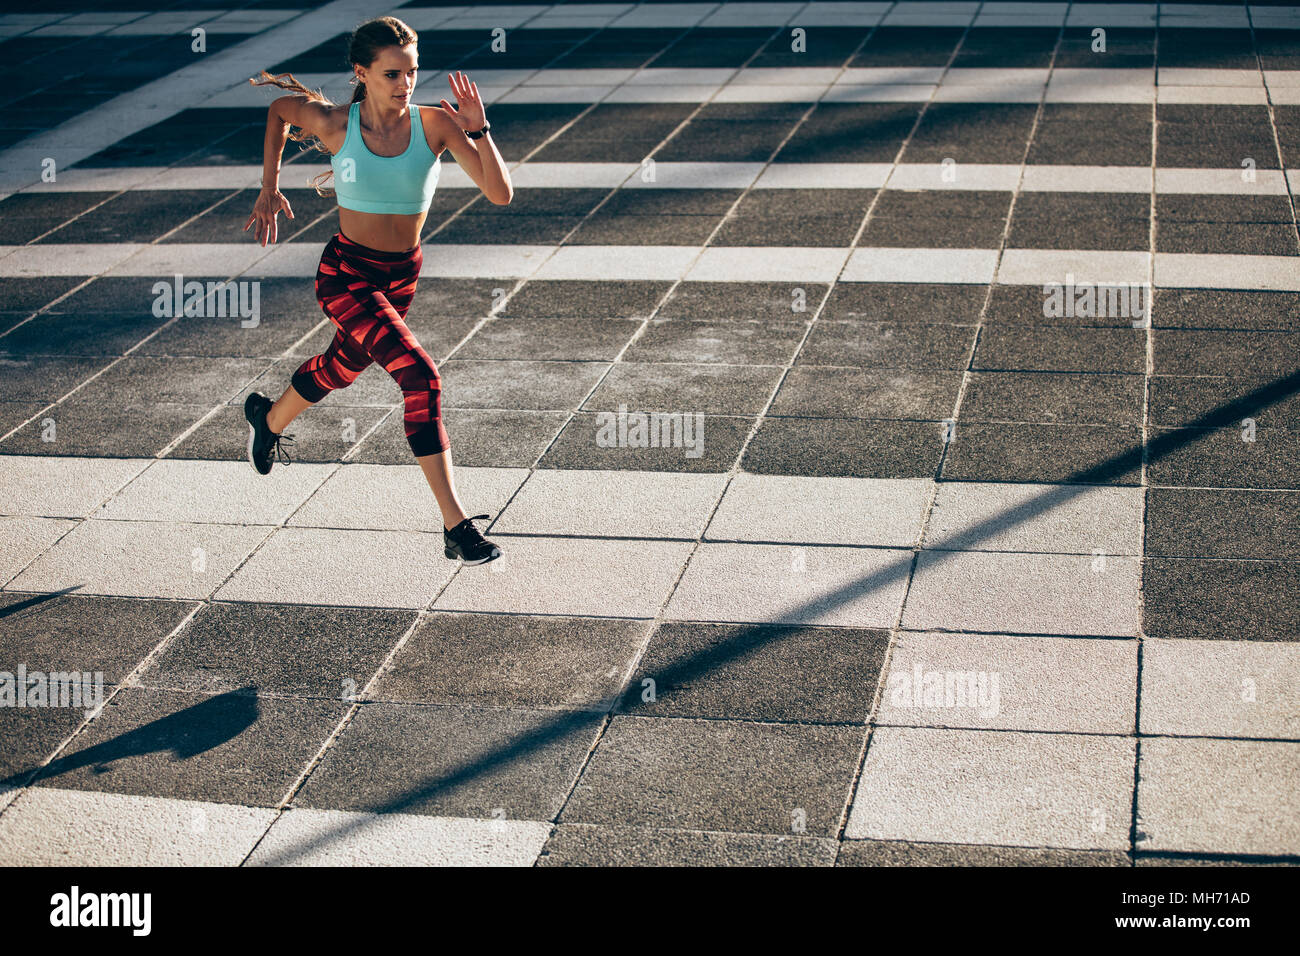 Sports woman in running and jumping outdoors in the city. Female athlete in running attire exercising in morning. Stock Photo